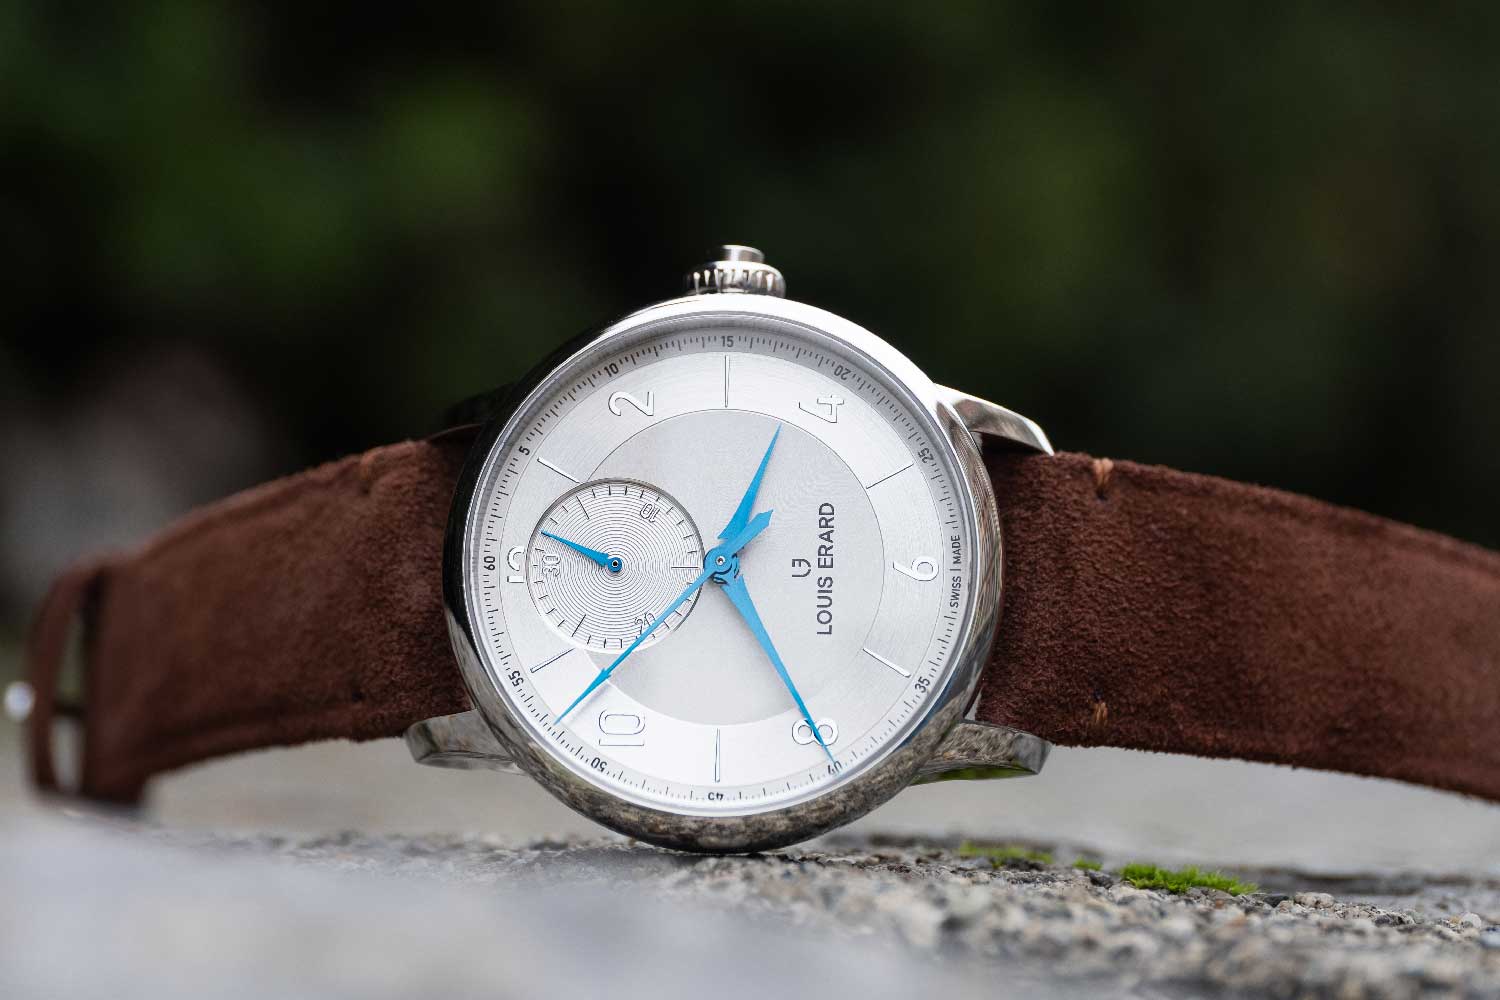 Louis Erard’s elegant monopusher chrono proves that not all chronographs need to be designed for the track or field.